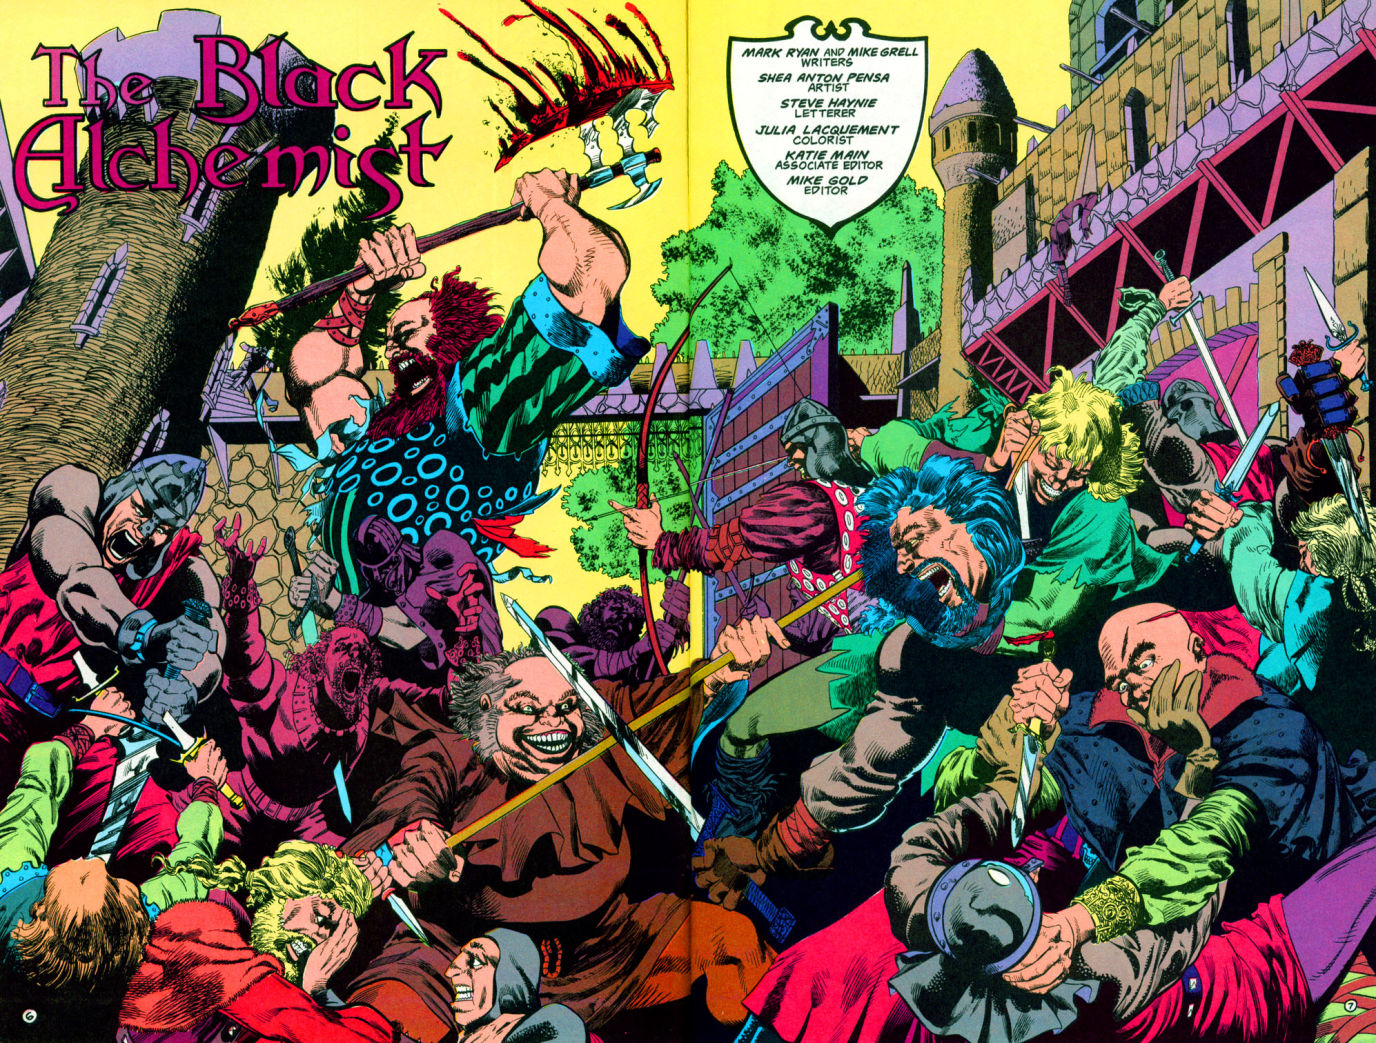 Double-page splash to Green Arrow Annual #4, depicting the Merry Men, art by Shea Anton Pensa